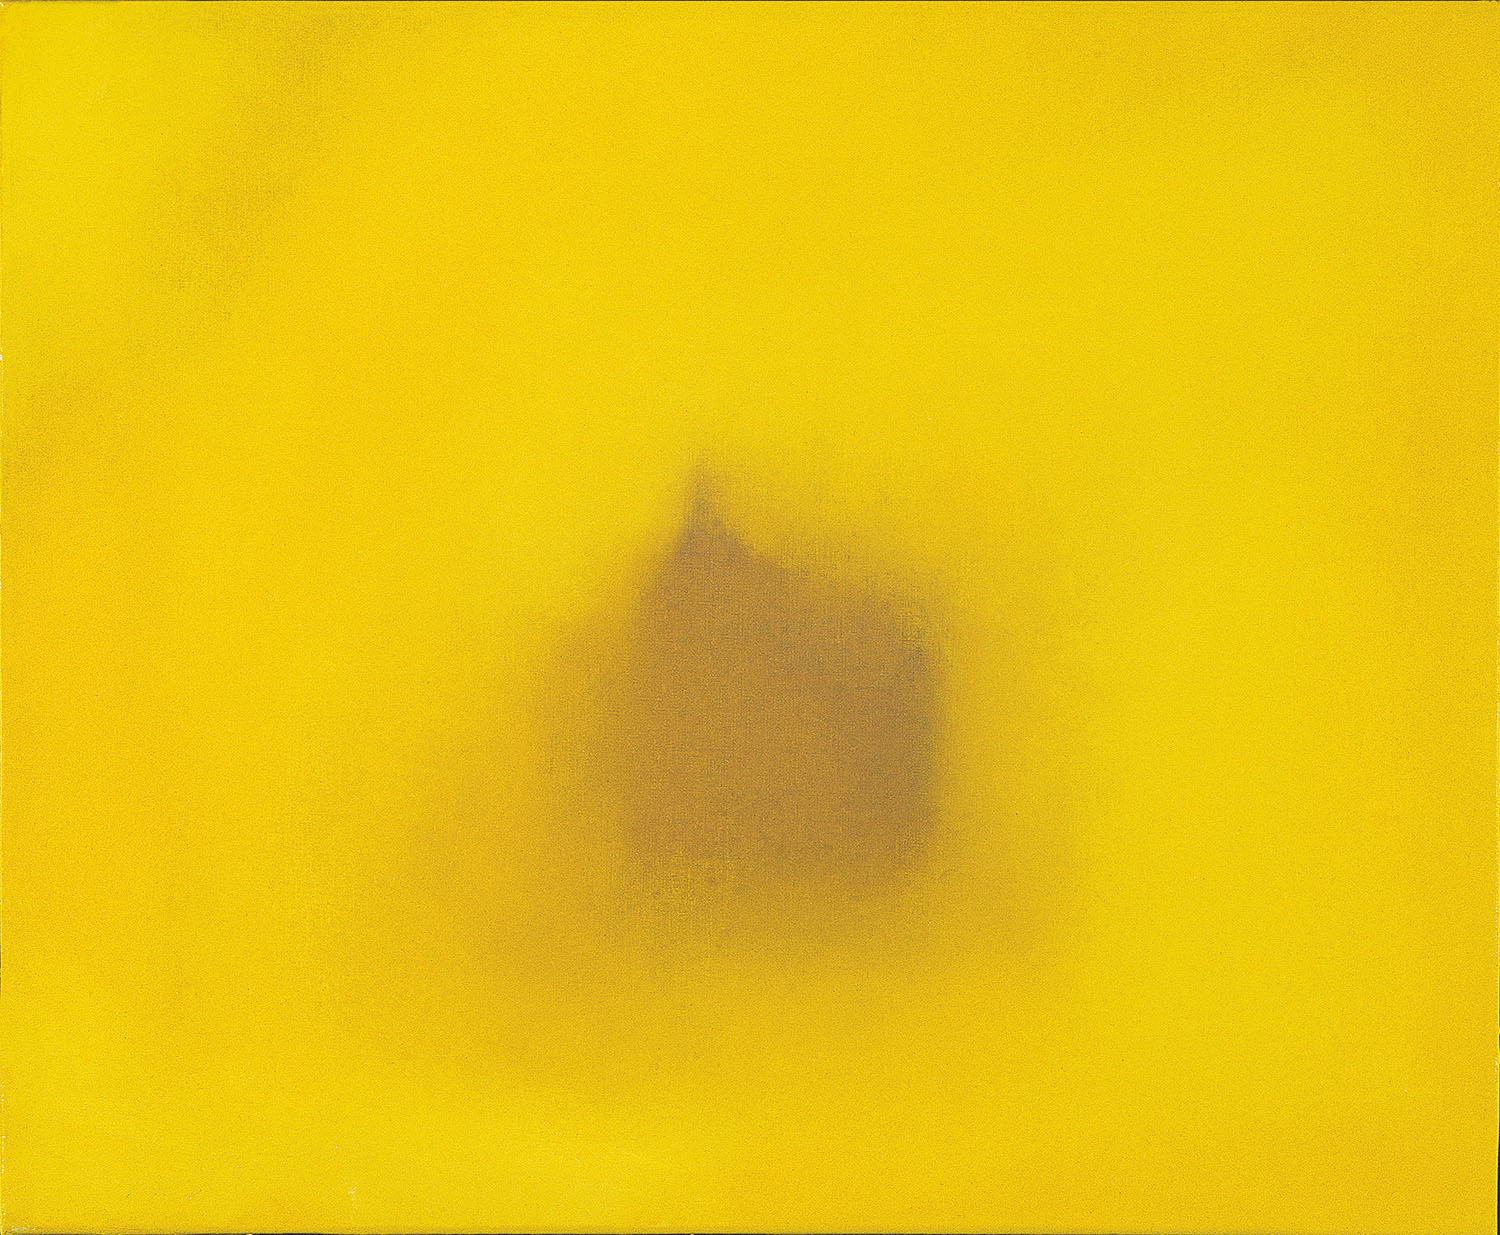 Atmosphere, 2004, oil on canvas, cm 38 x 46